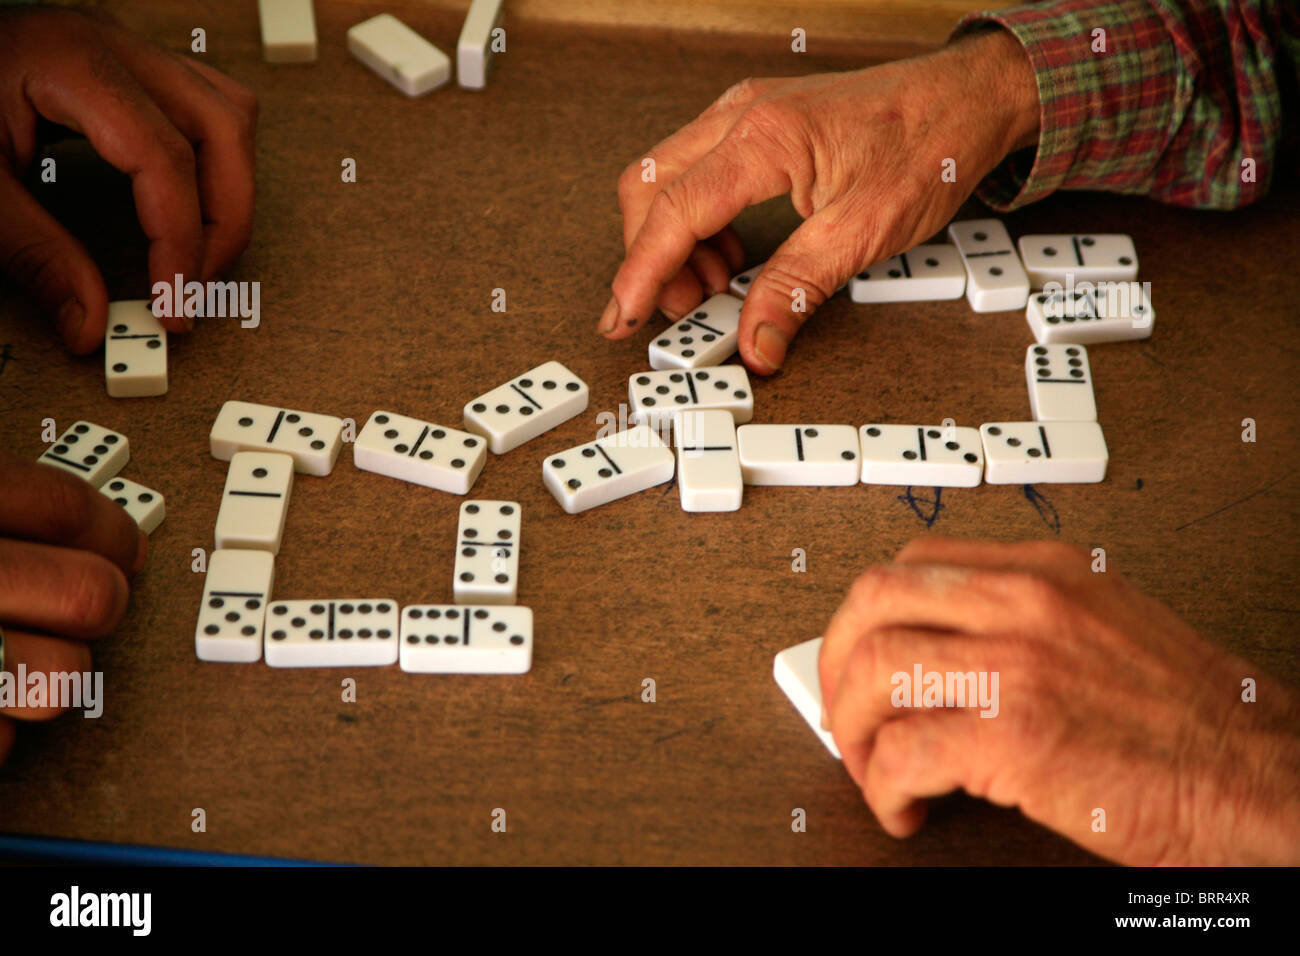 Men playing a game of dominos Stock Photo